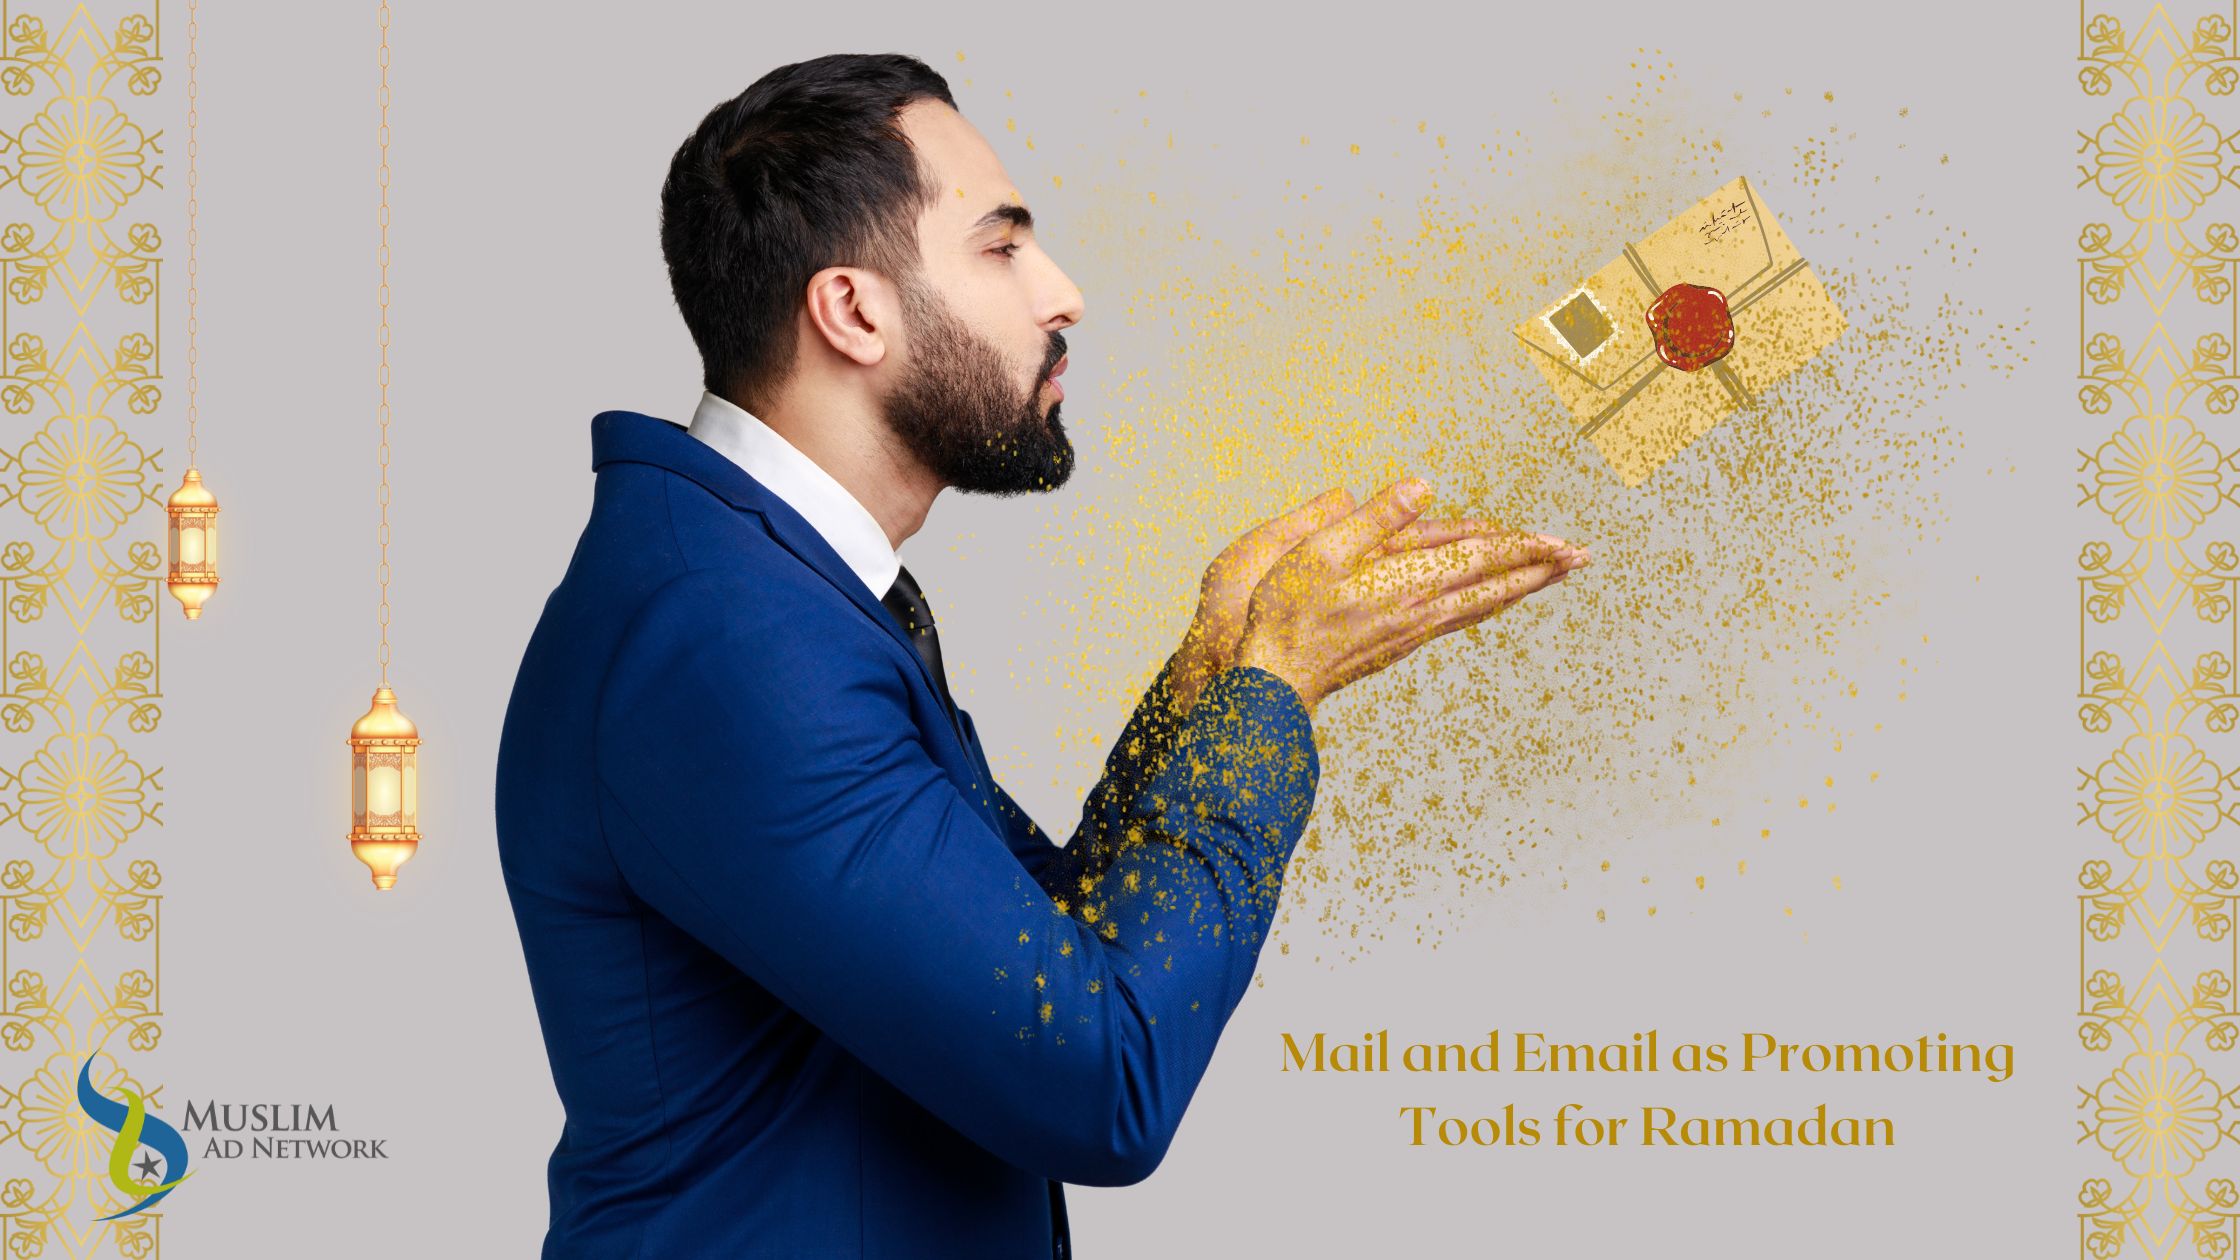 Mail and Email as Promoting Tools for Ramadan